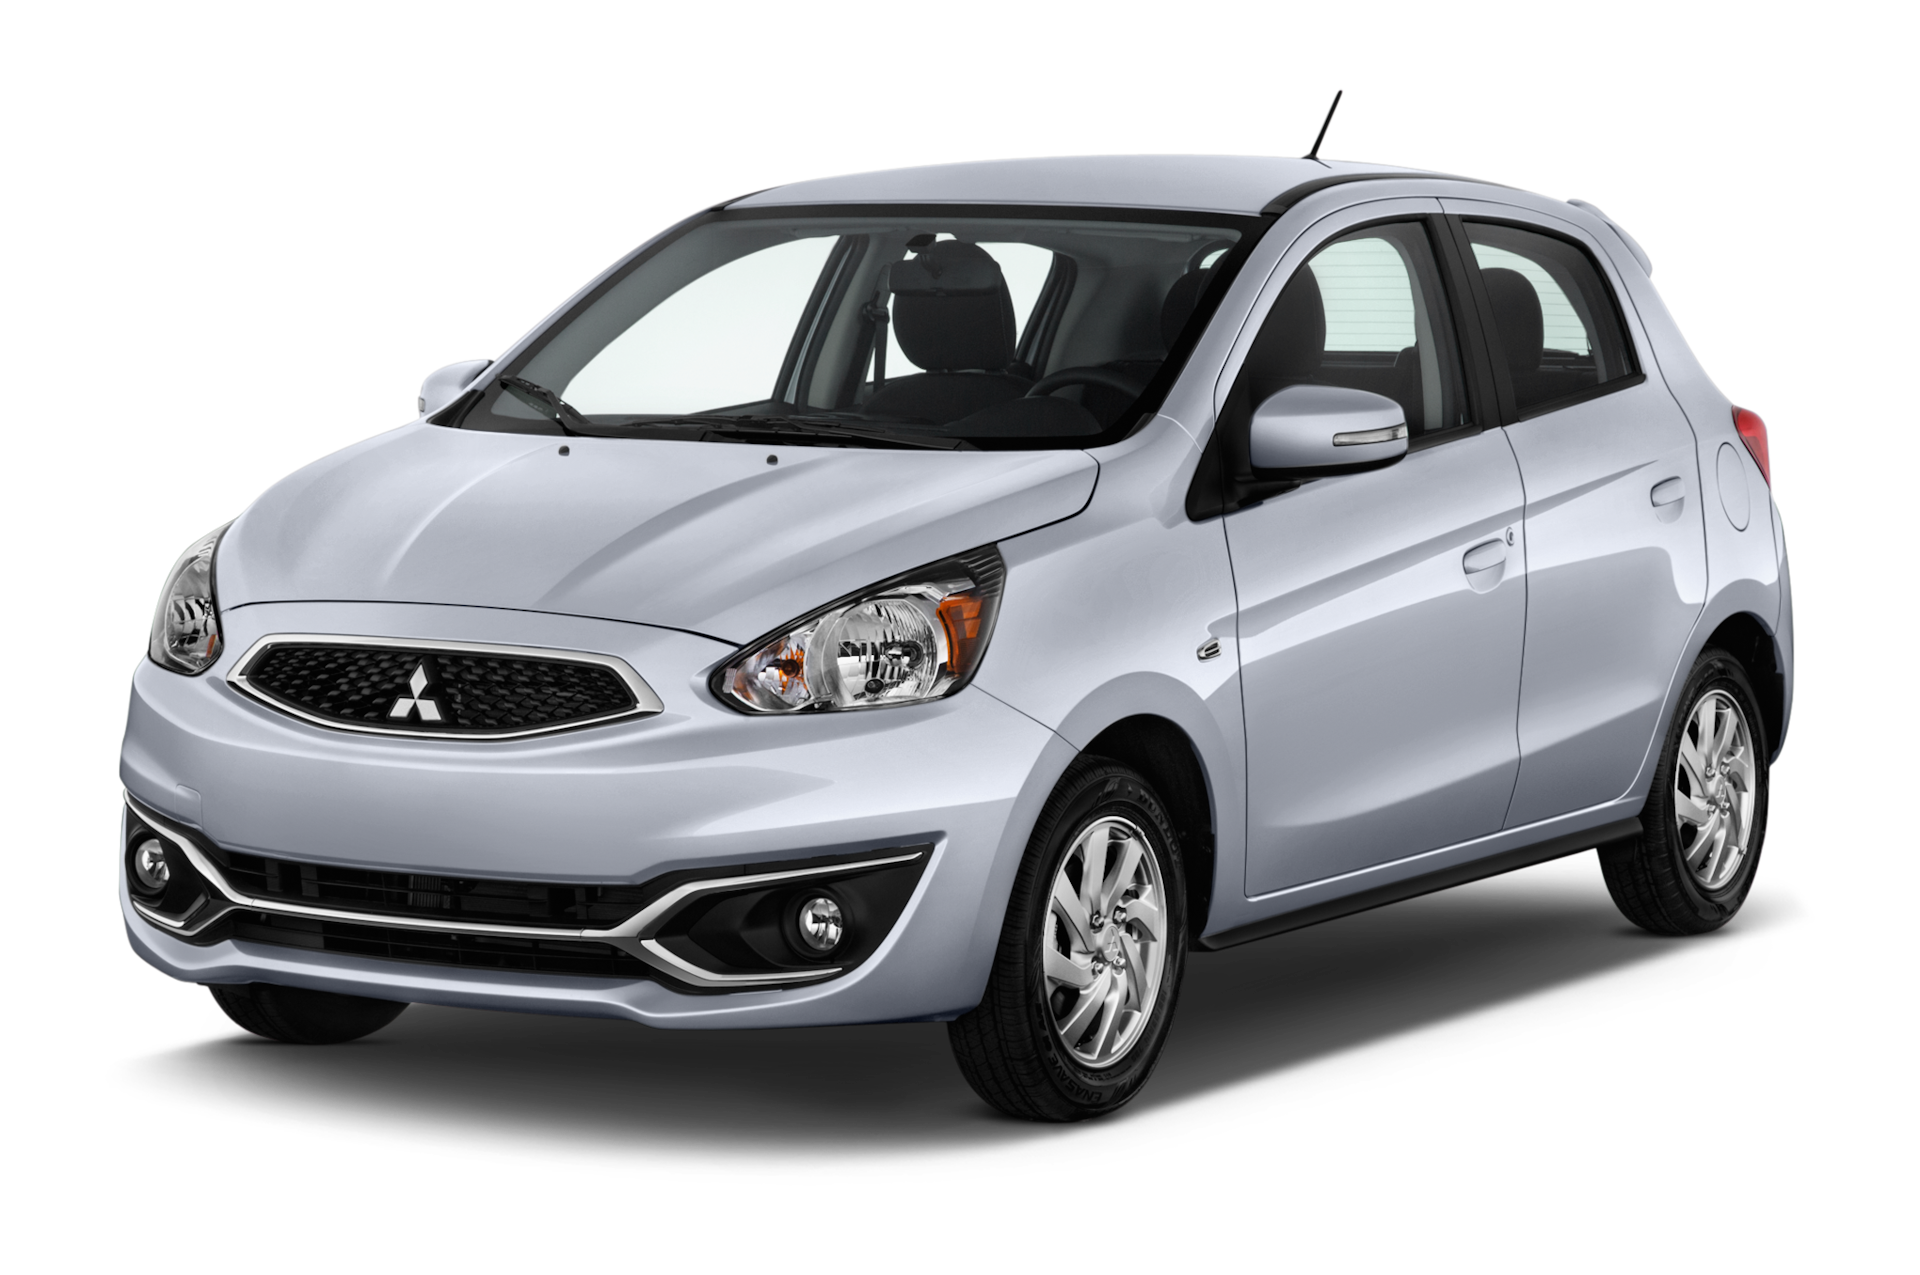 2017 Mitsubishi Mirage Prices, Reviews, and Photos - MotorTrend